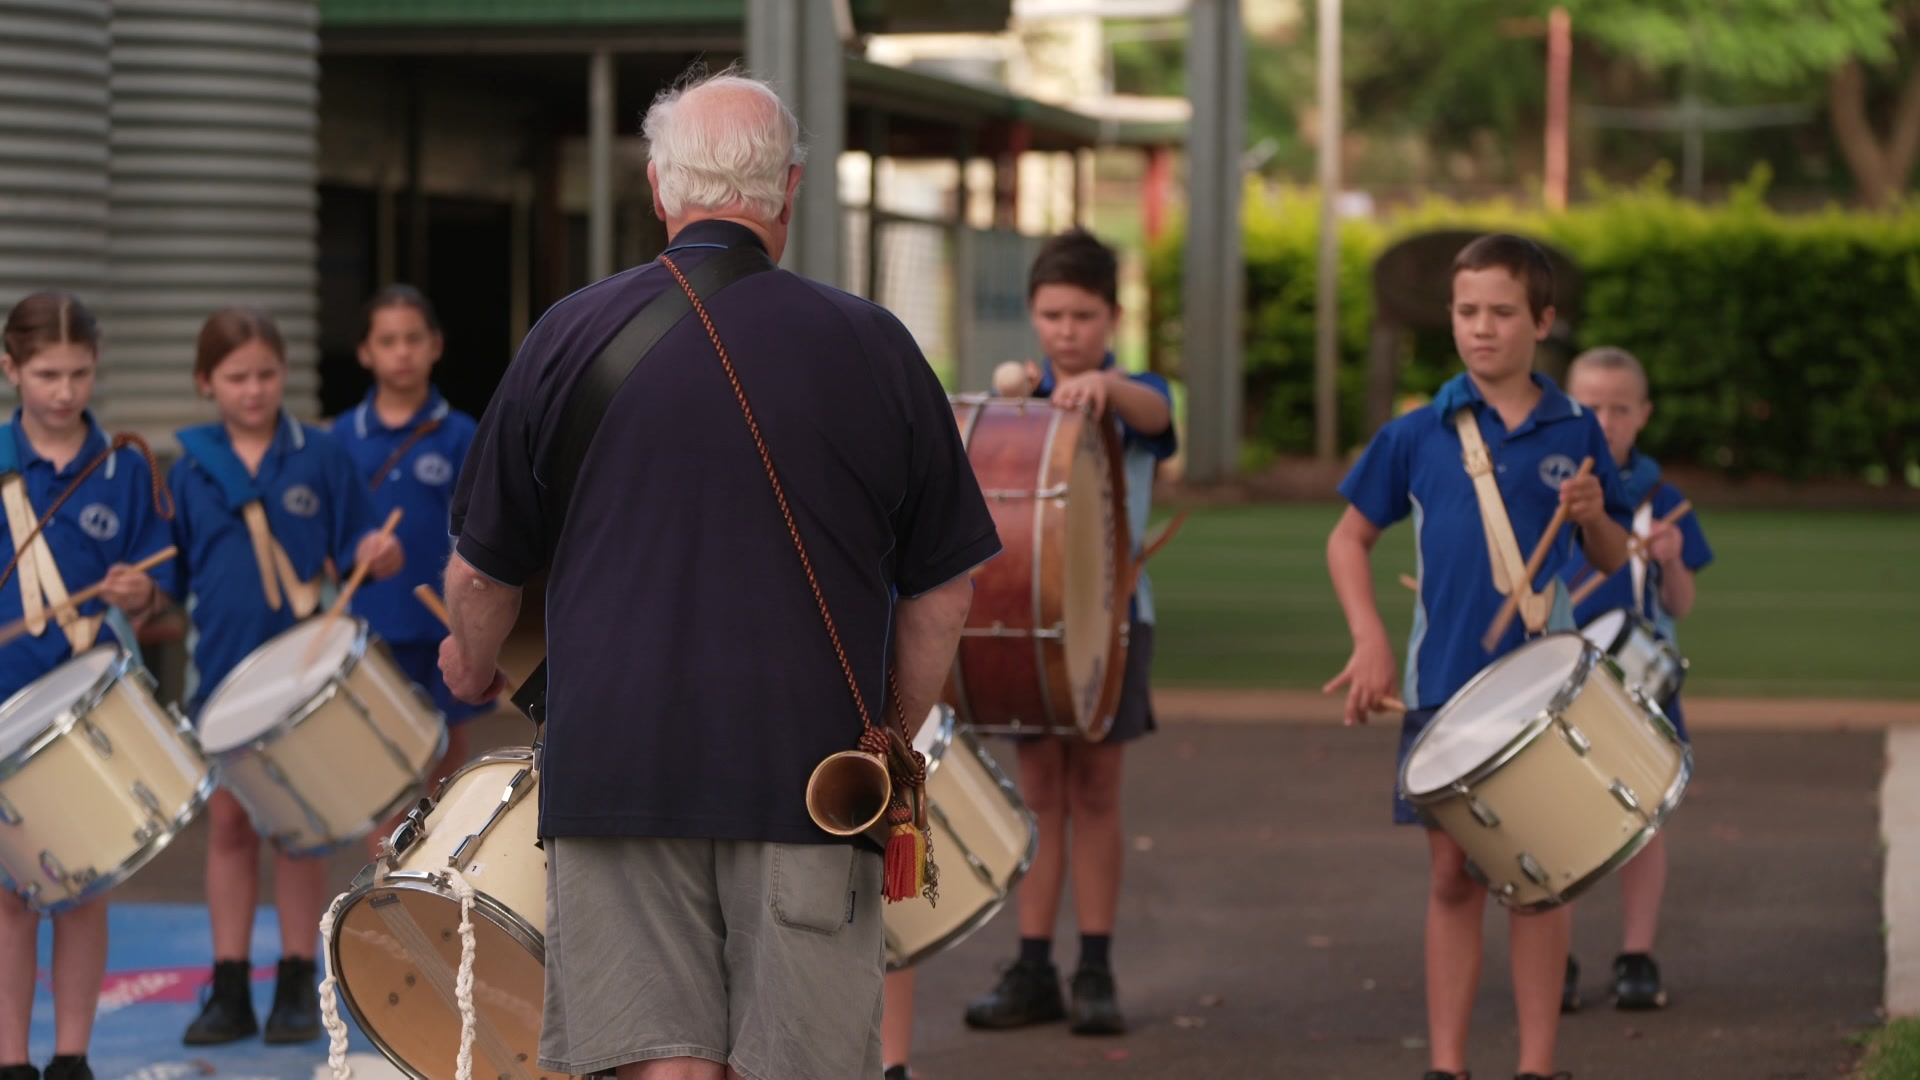 Man with his back to the camera leads a primary school-aged band of buglers and drummers.